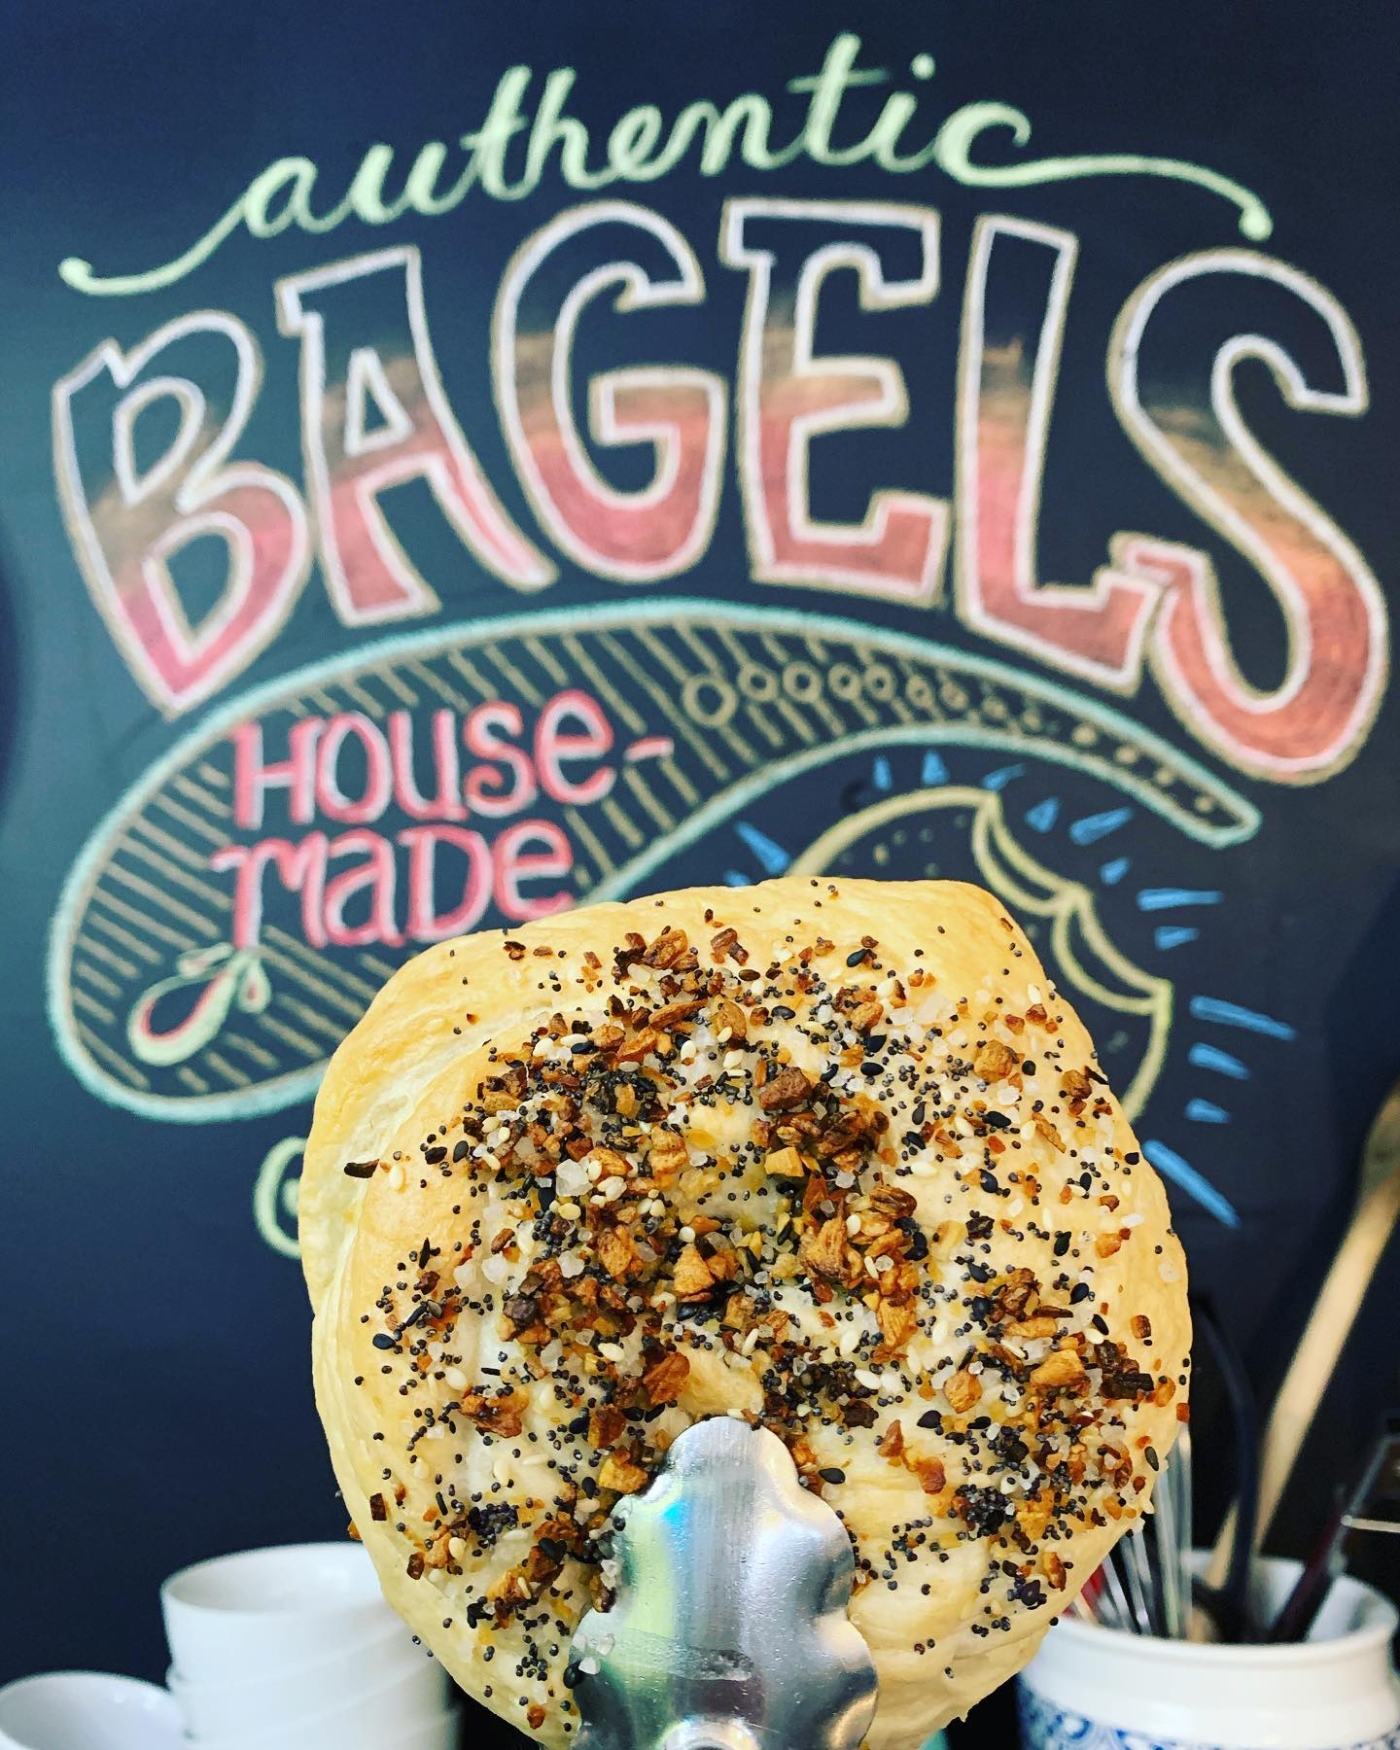 Bagel in foreground with text "authentic housemade bagels" in background